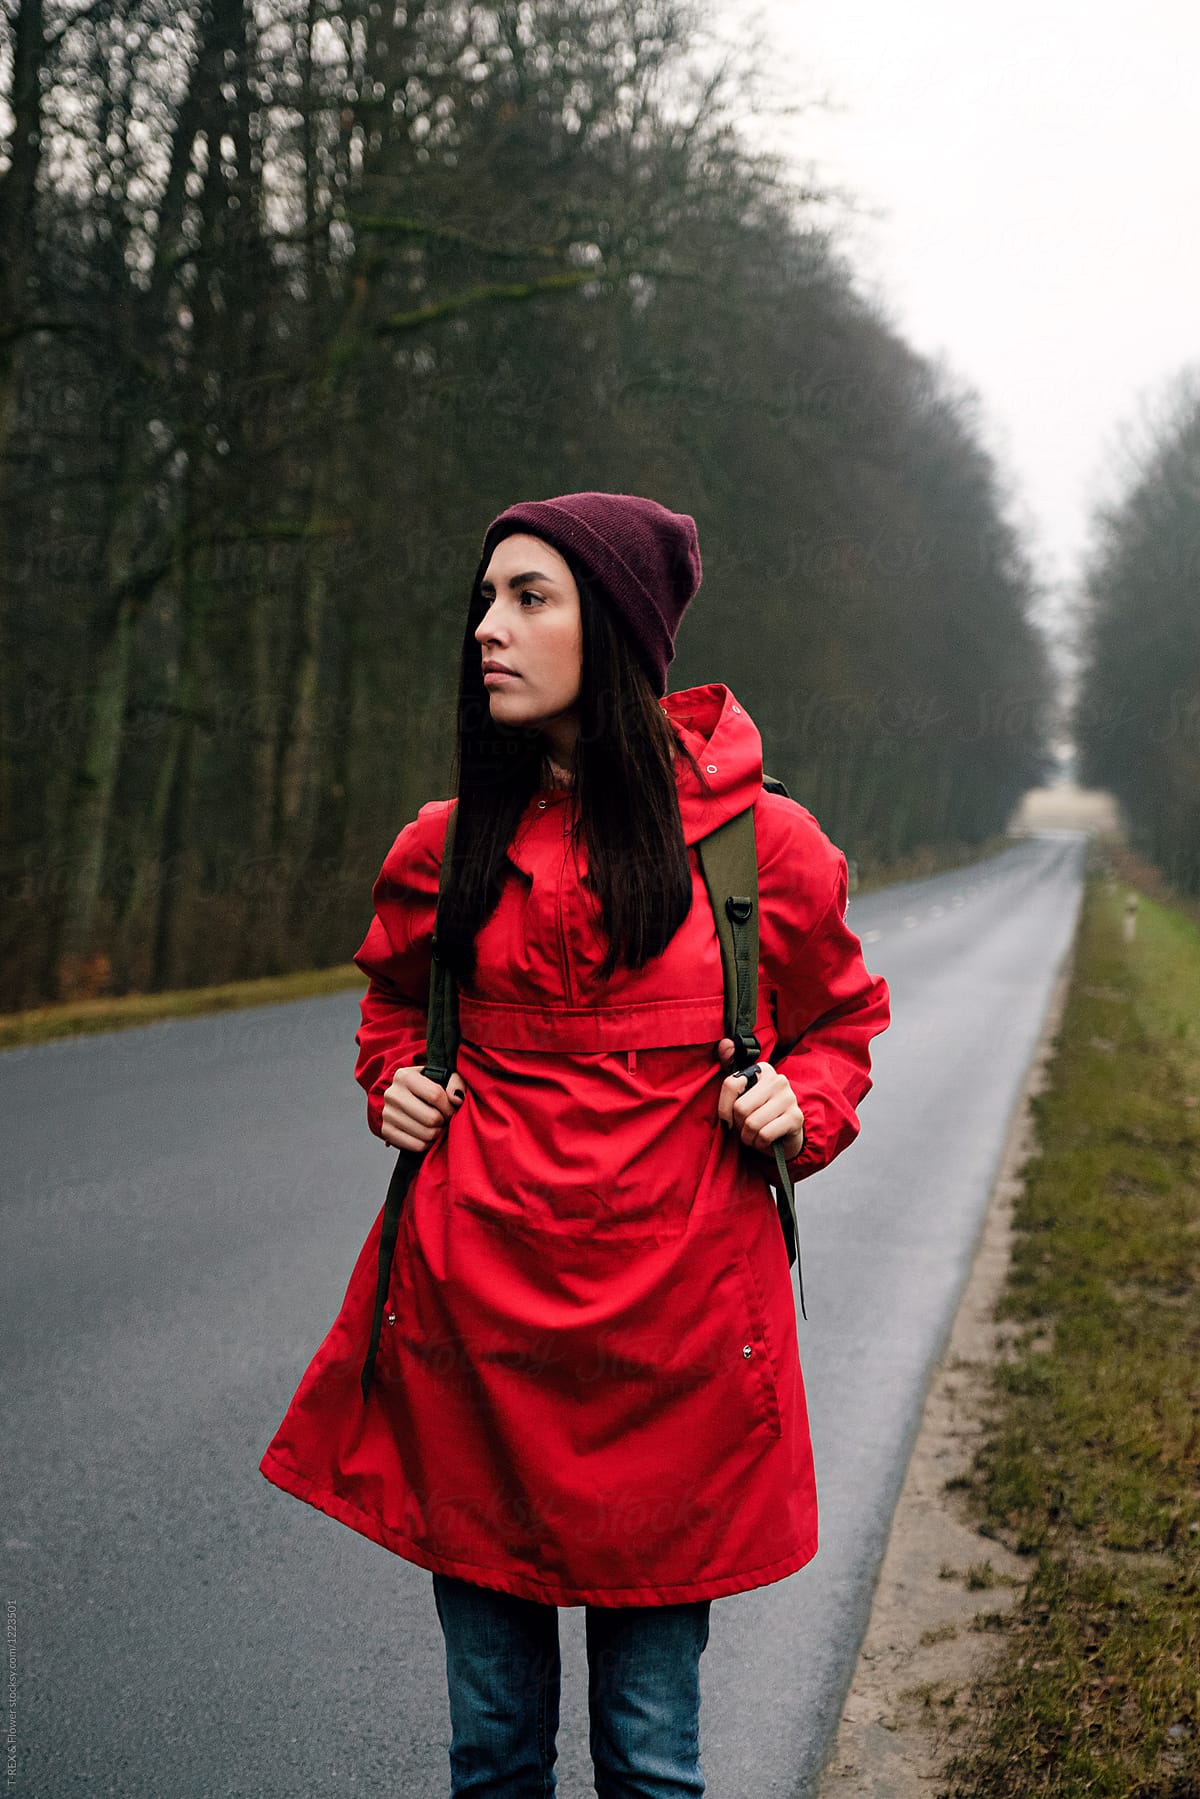 Woman with backpack on empty road